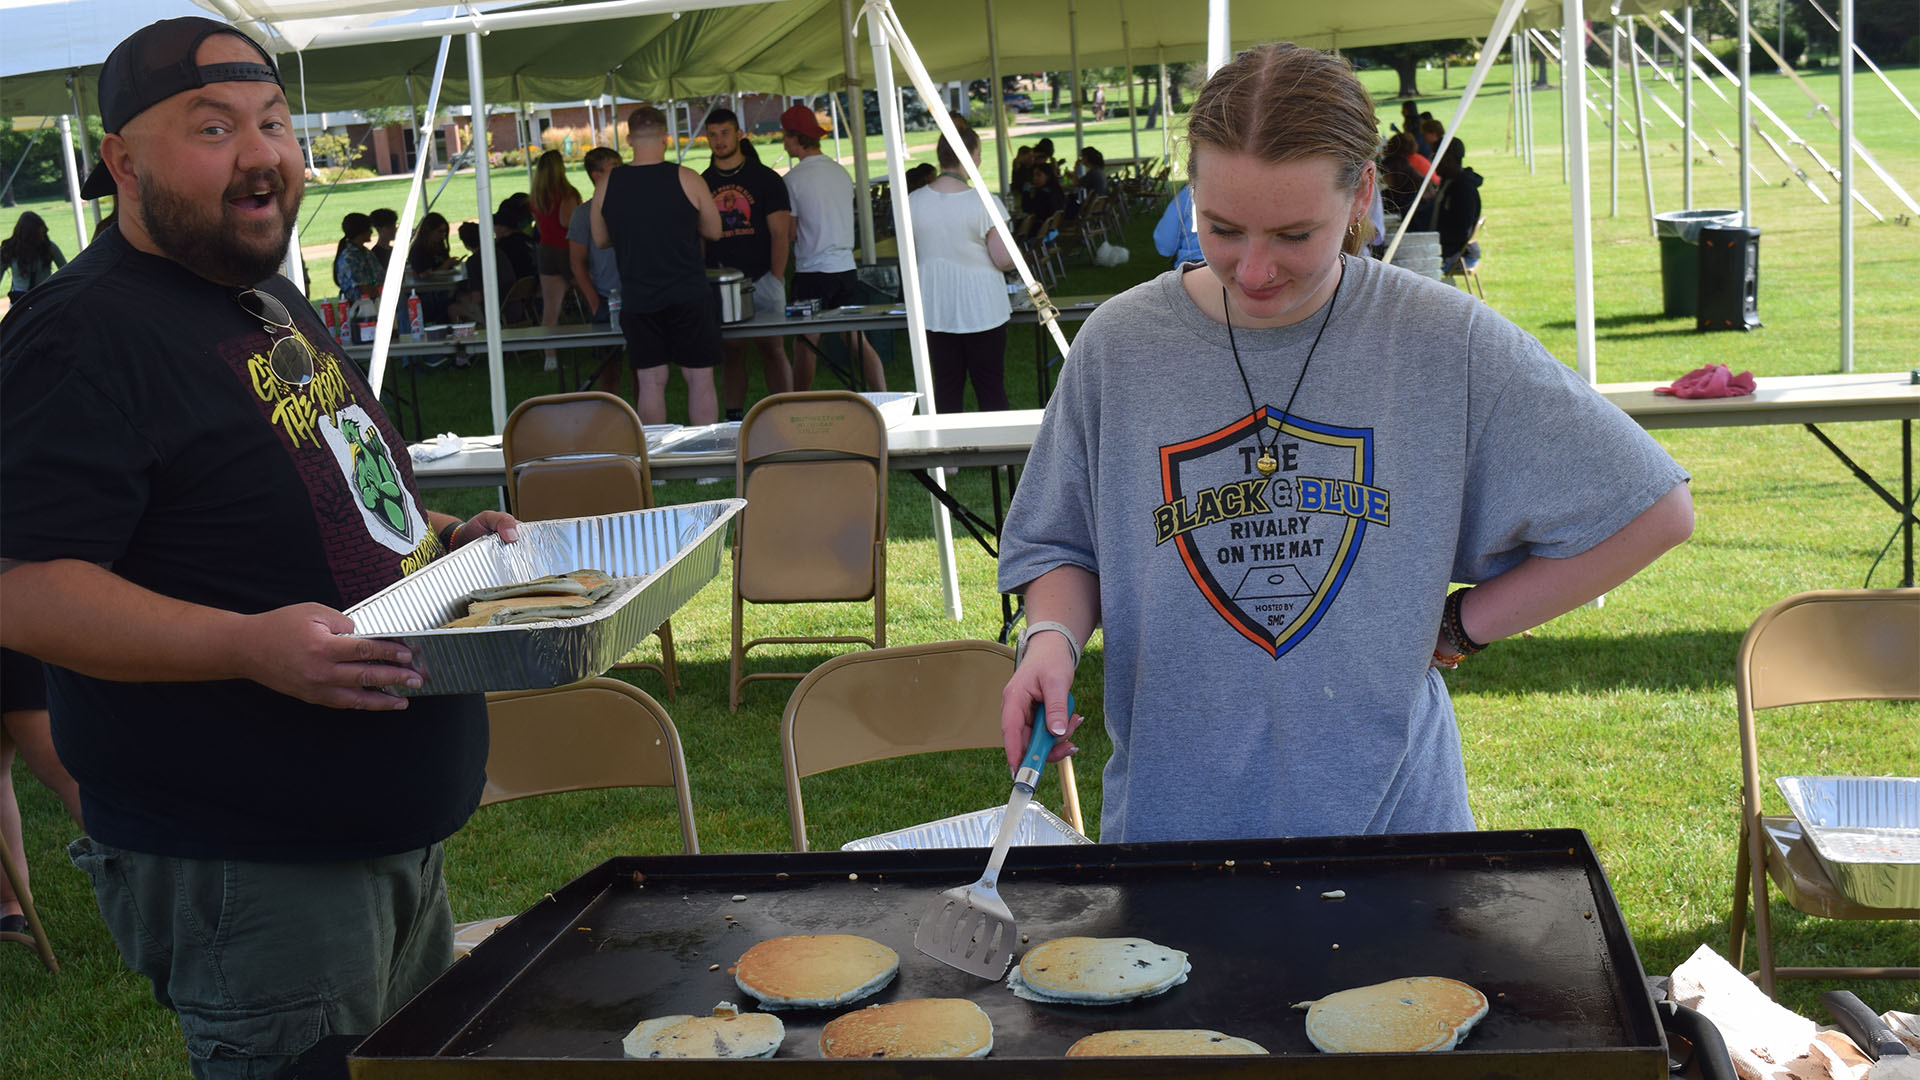 Pancake Palooza is one tasty part of Welcome Week at SMC!